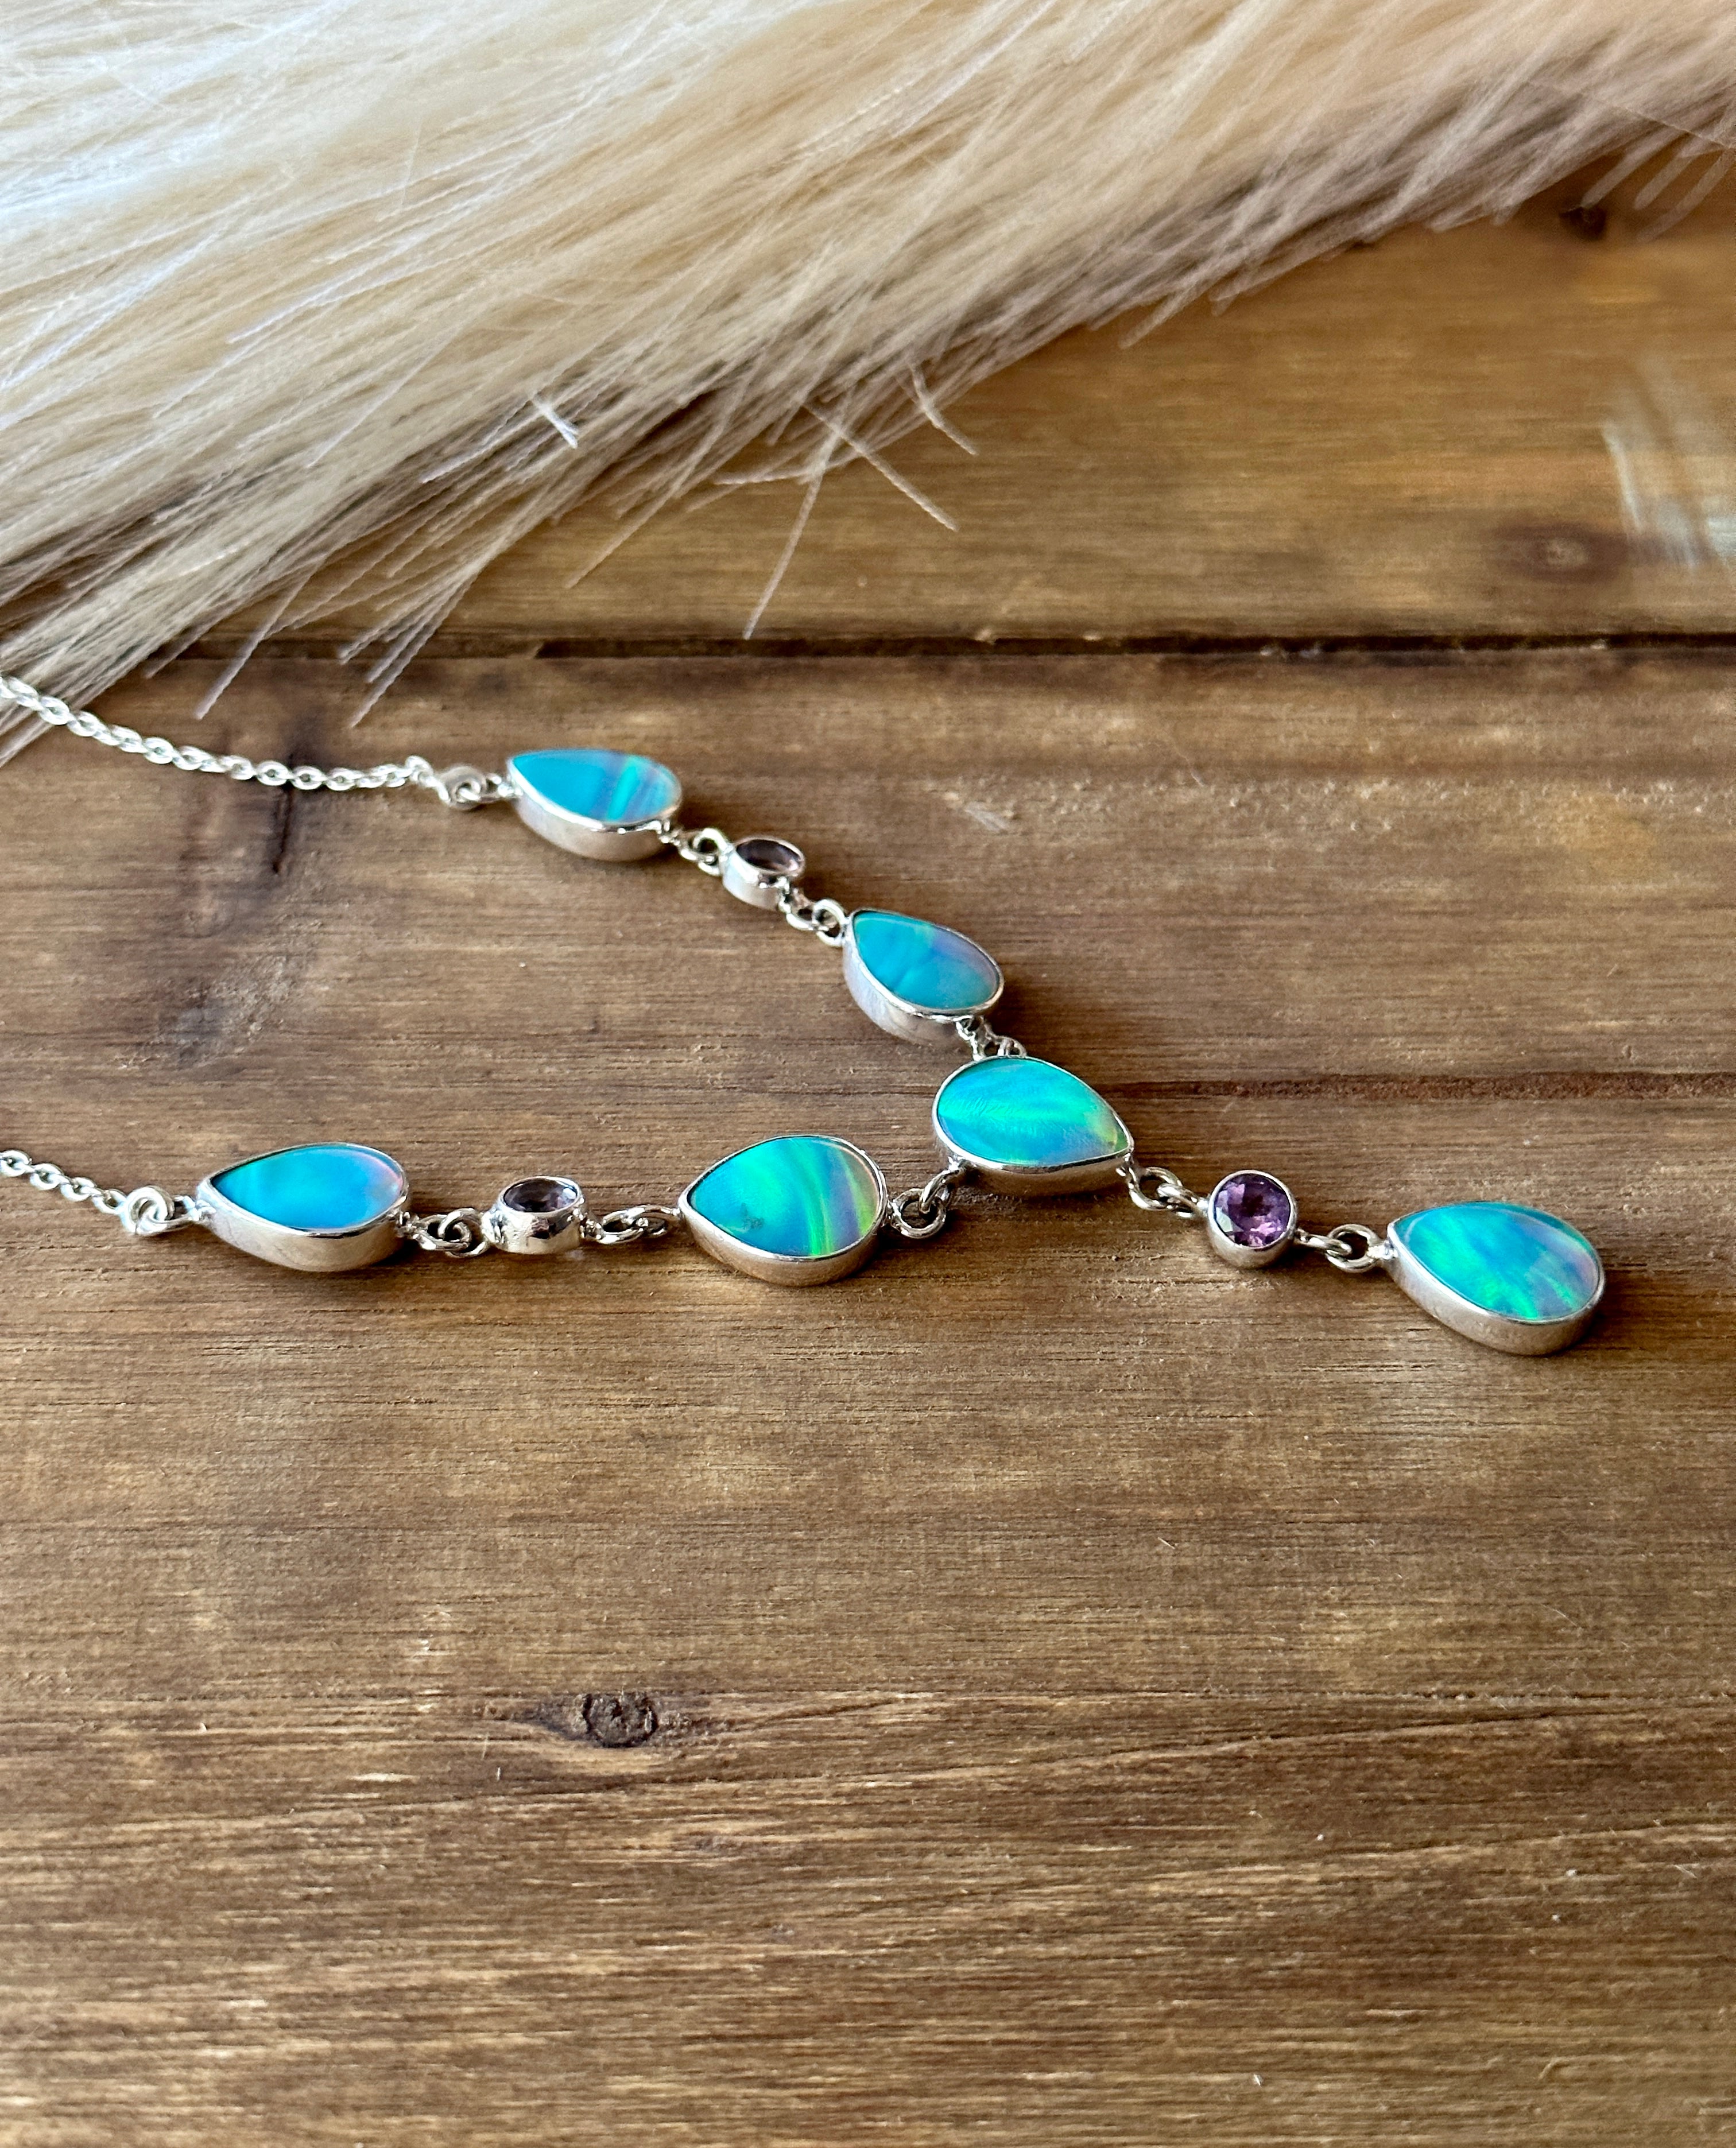 Southwest Handmade Mohave Opal & Sterling Silver Lariat Necklace